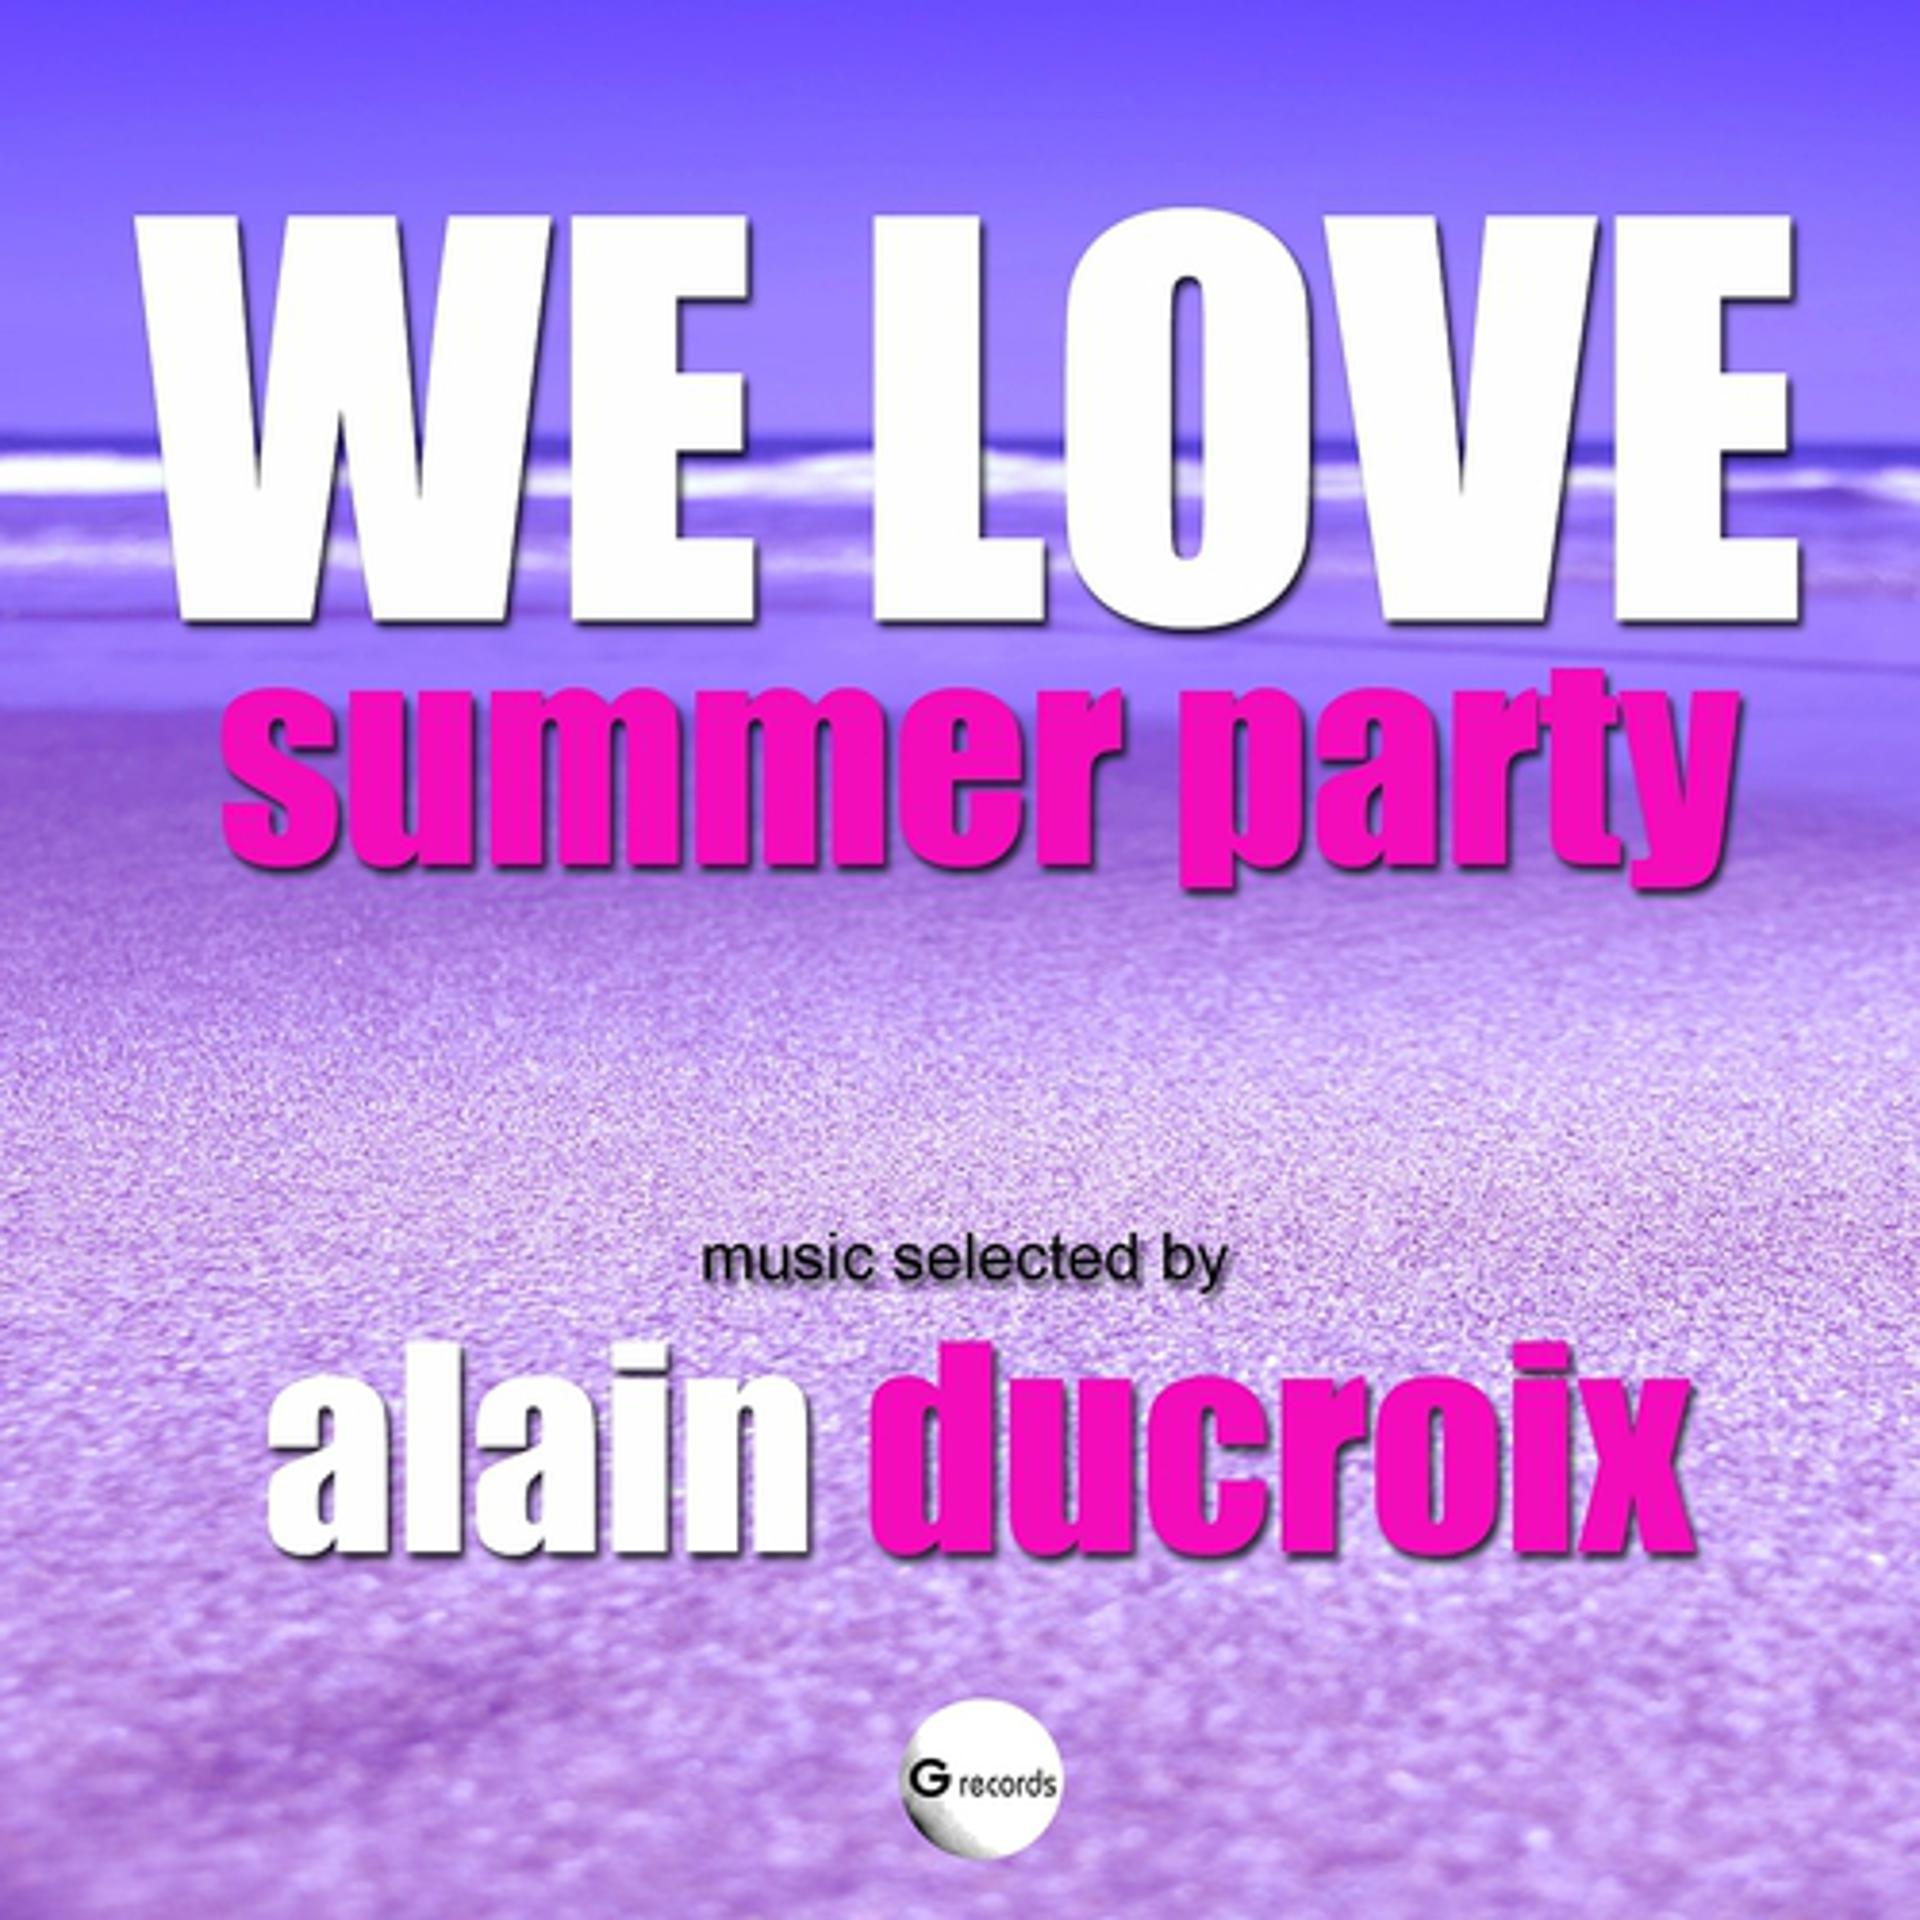 Постер альбома We Love Summer Party (Selected by Alain Ducroix)